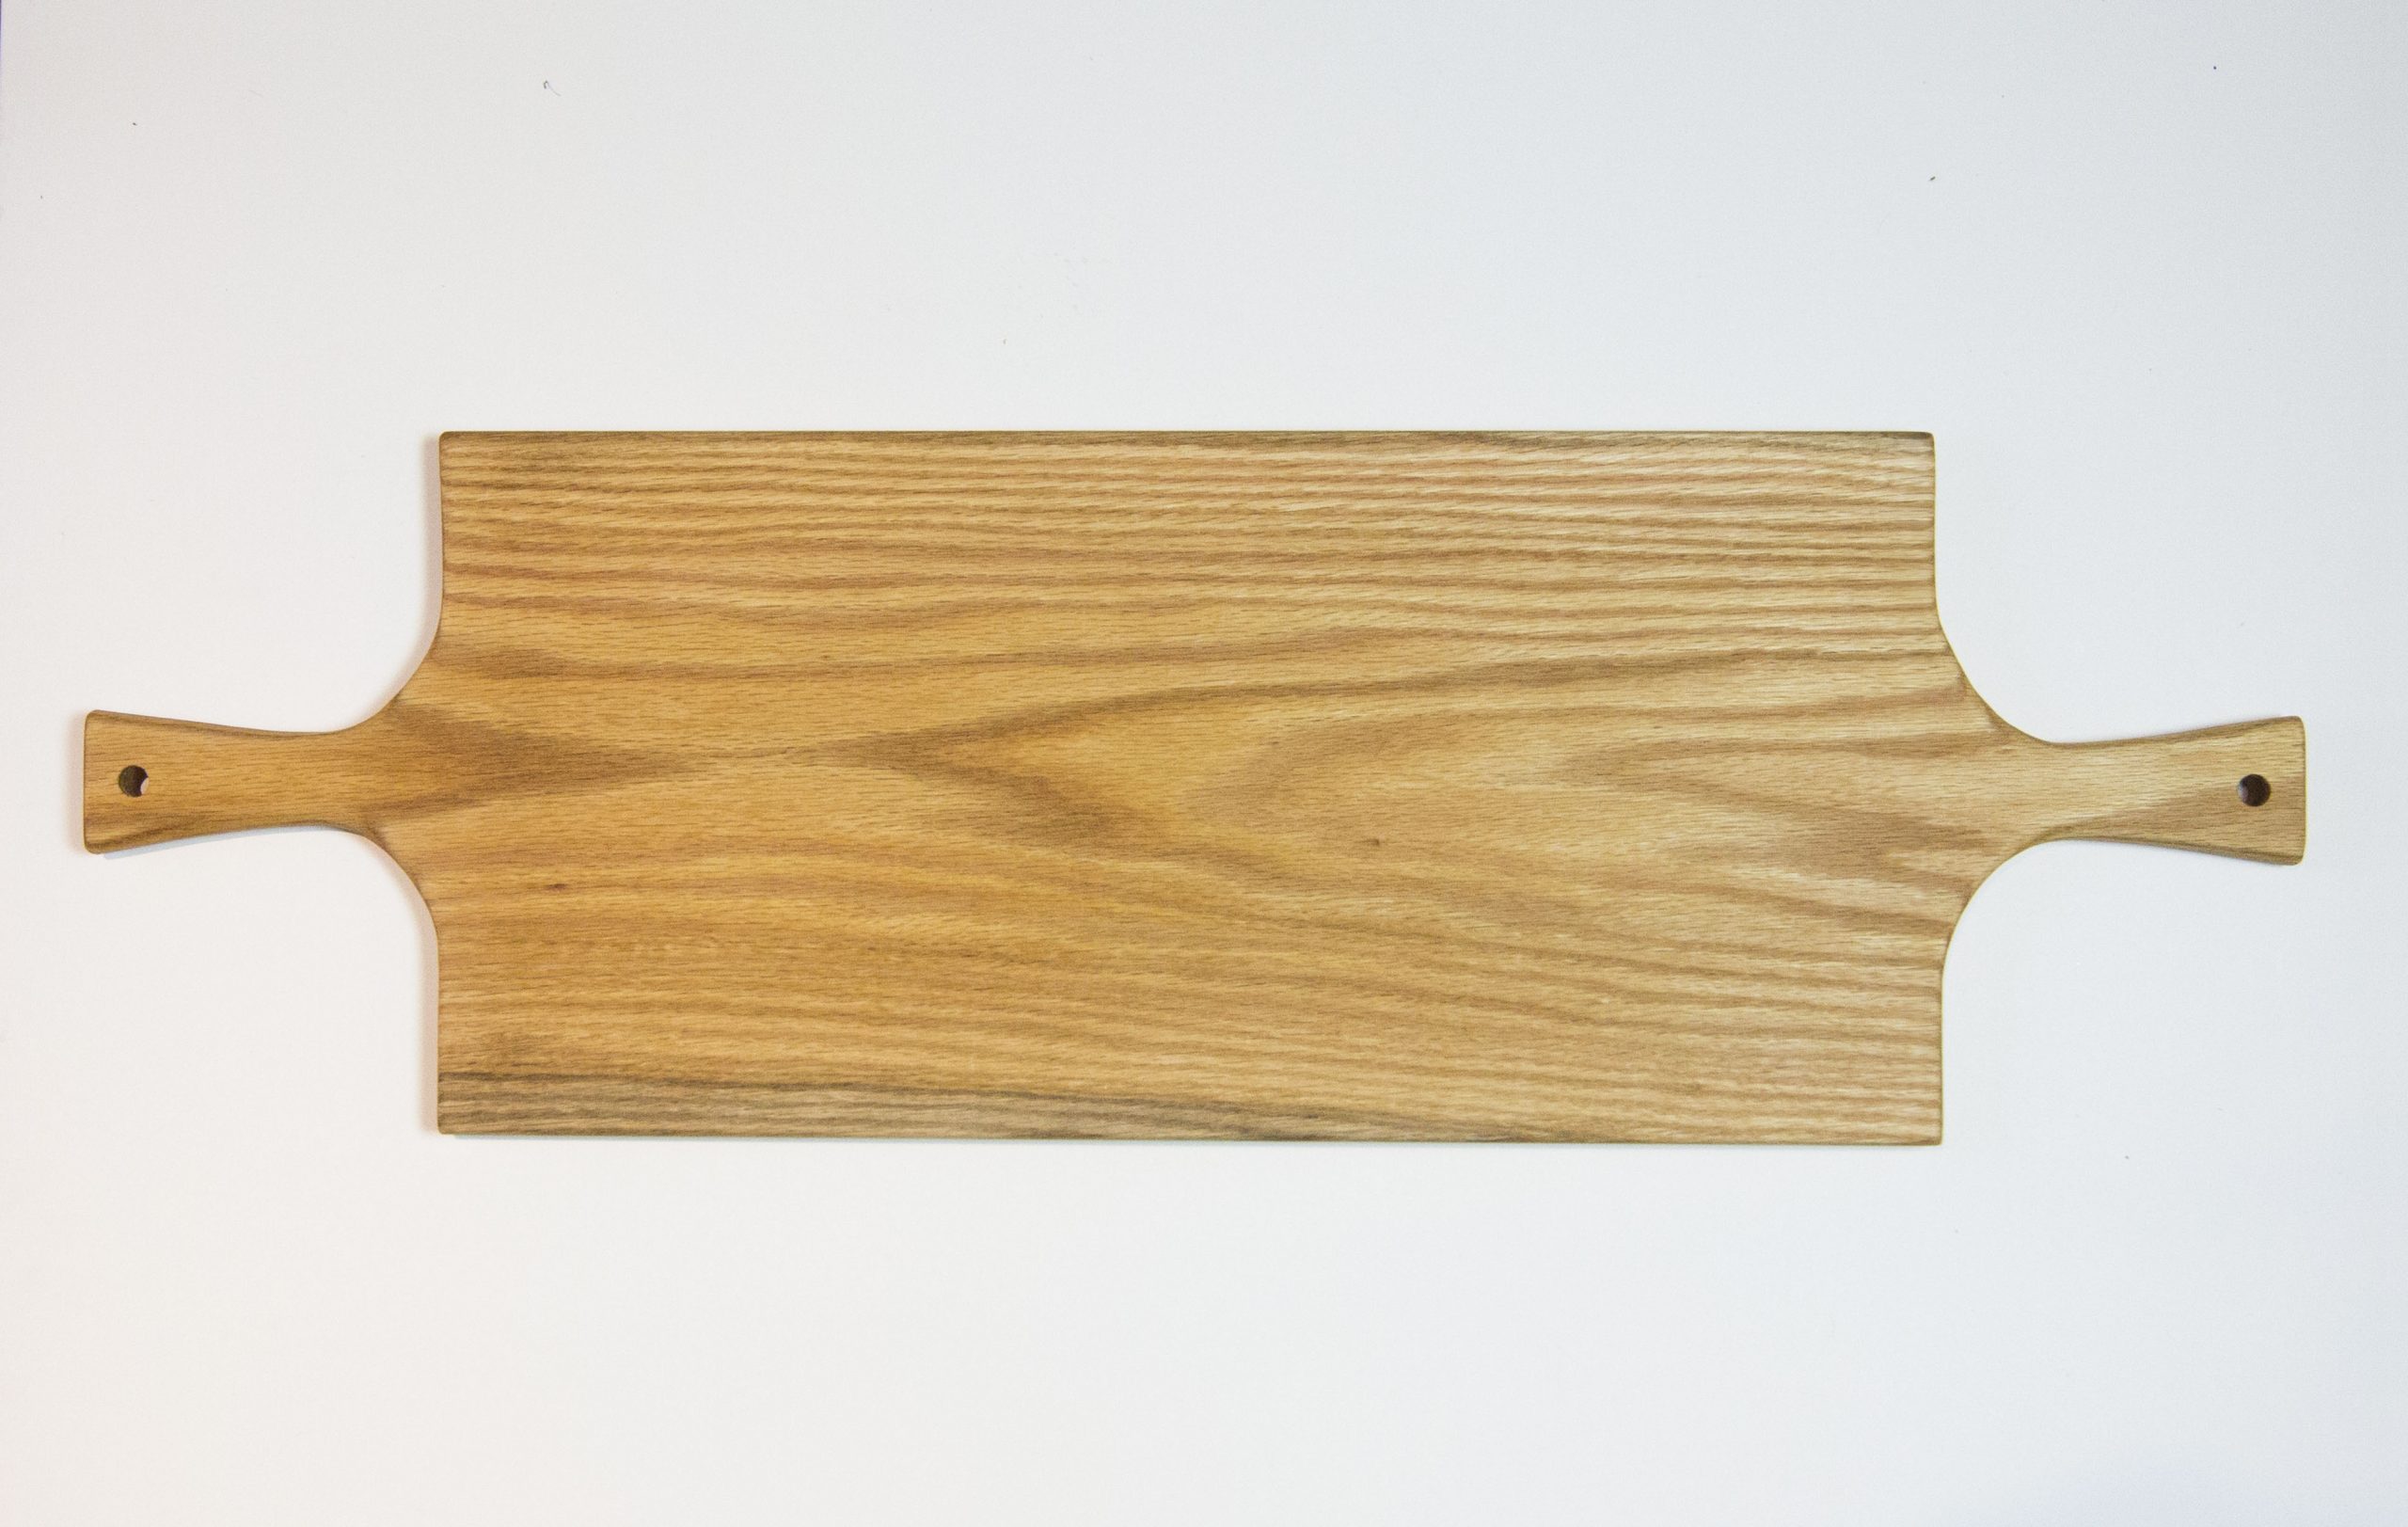 Food Safe 2 Section Serving Board Large Serving Tray Oak Cutting Board